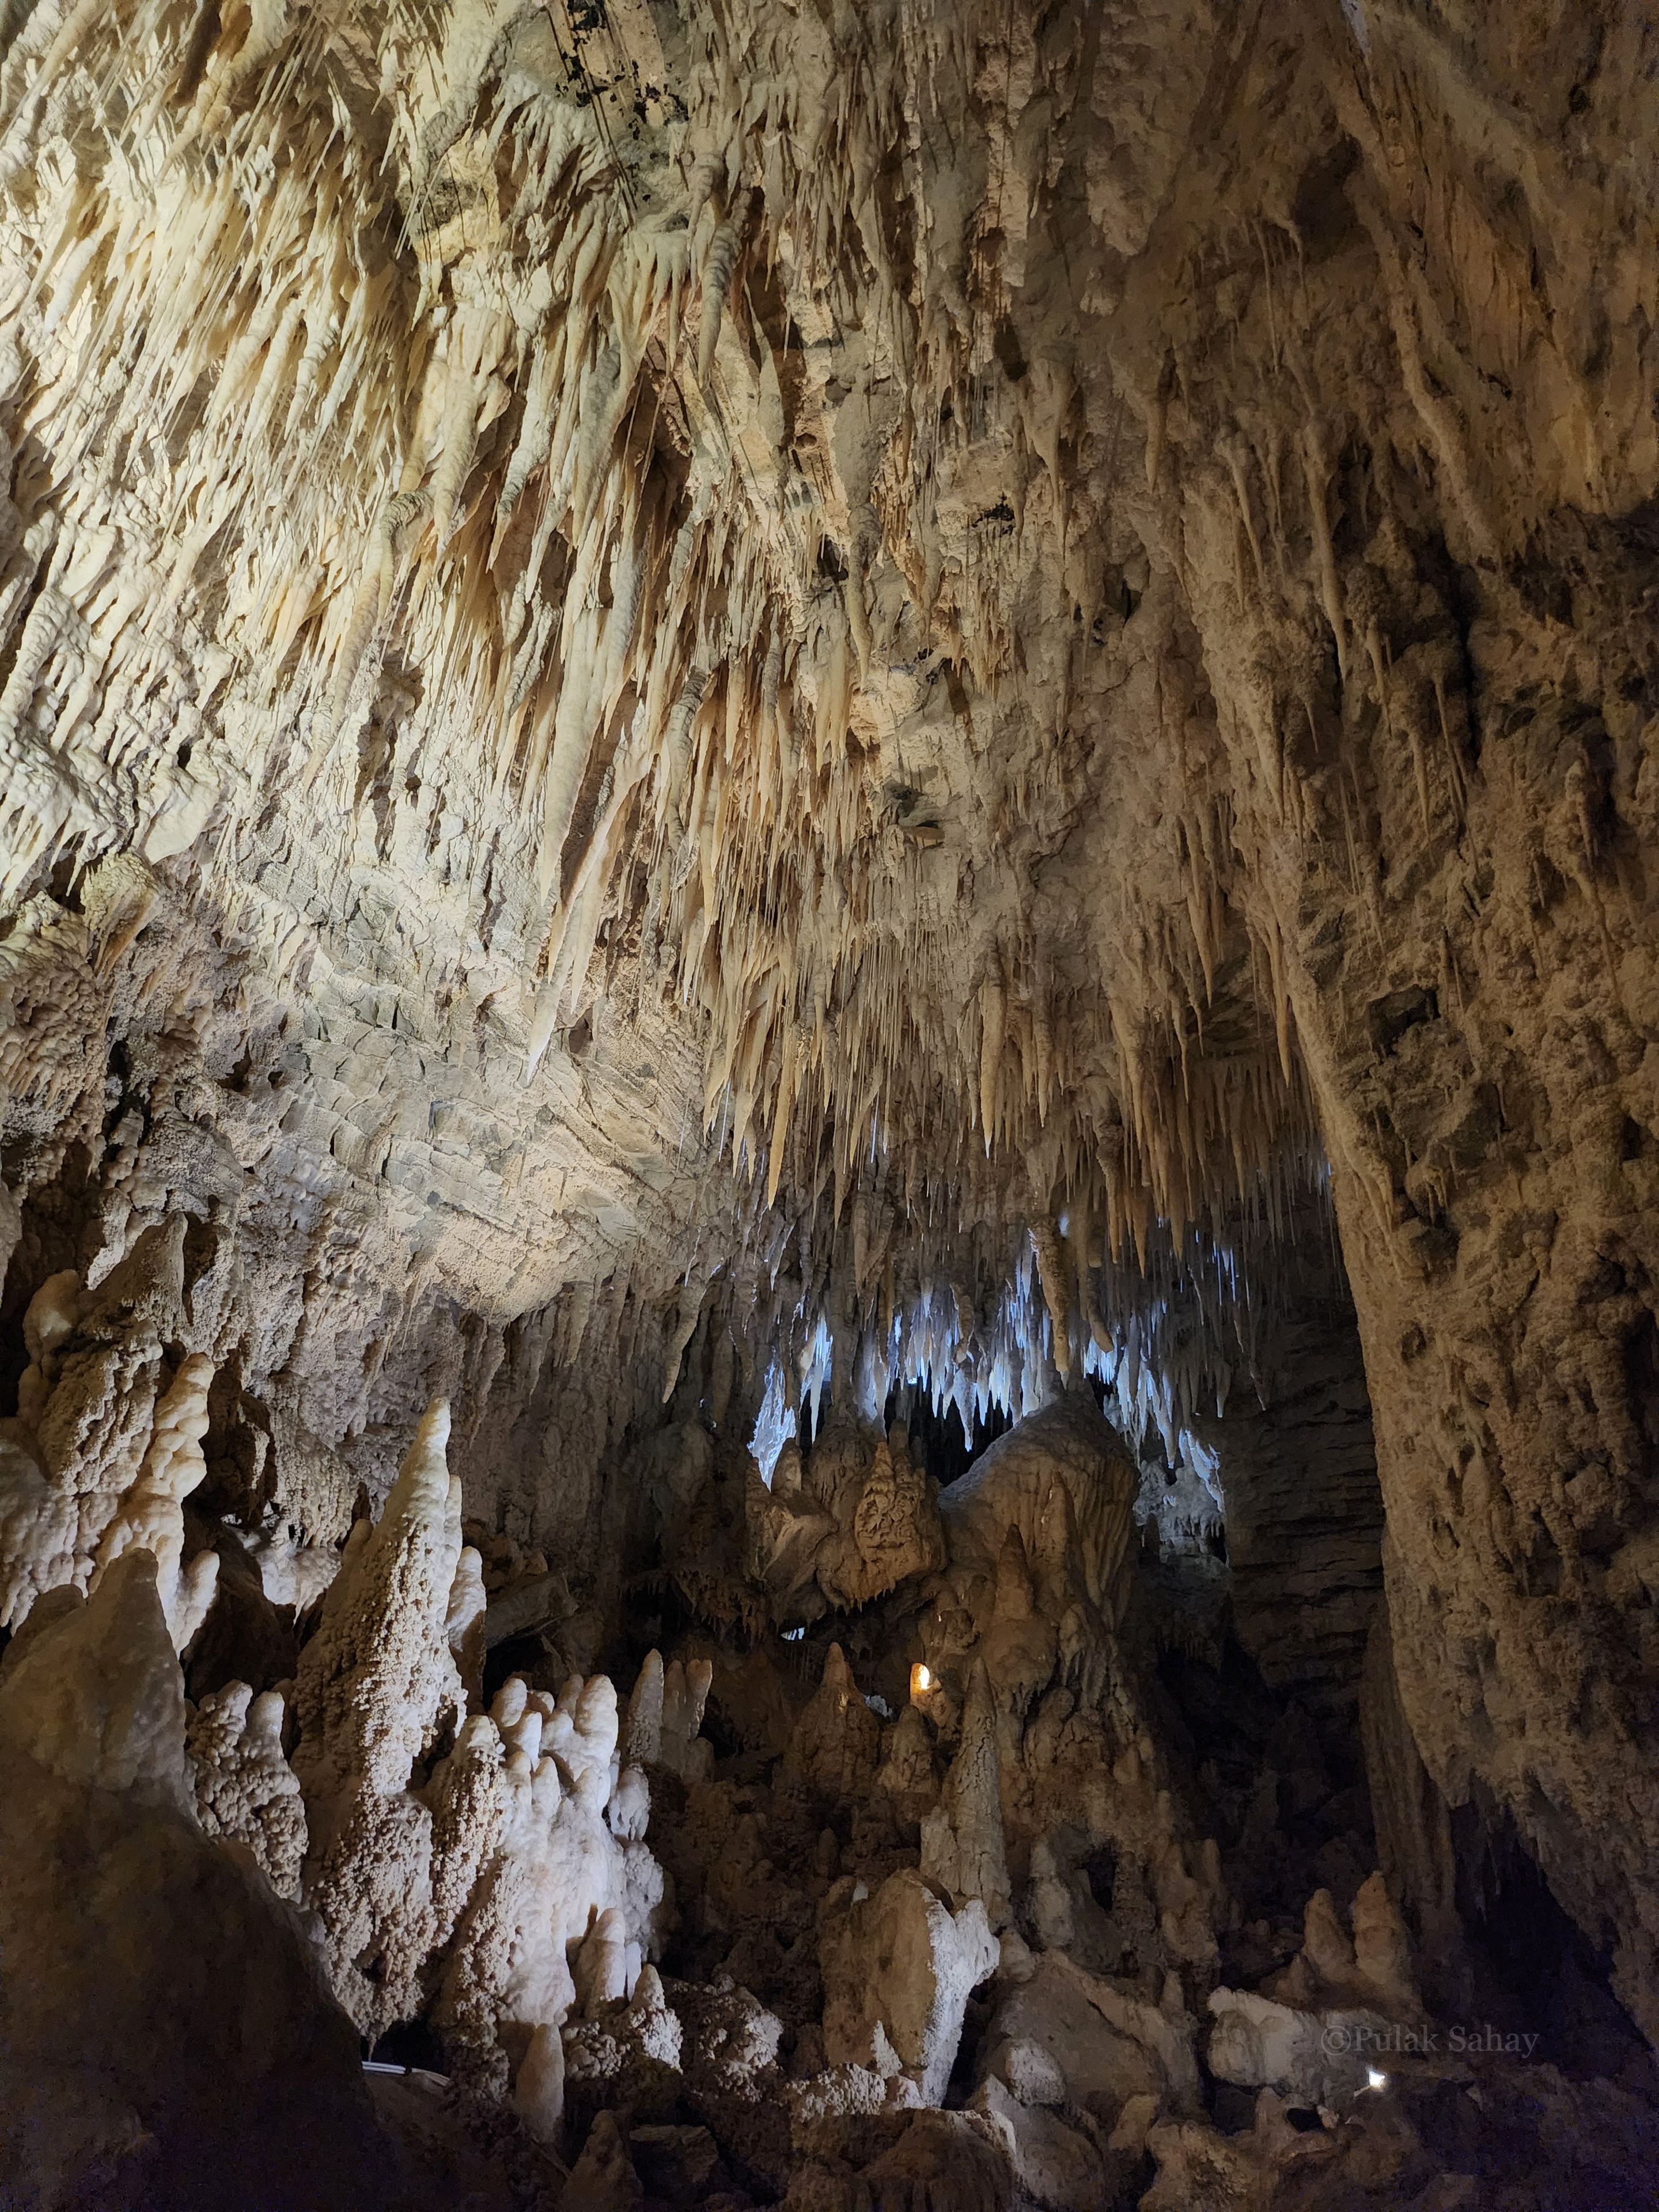 Cave with Stalactites and Stalagmites